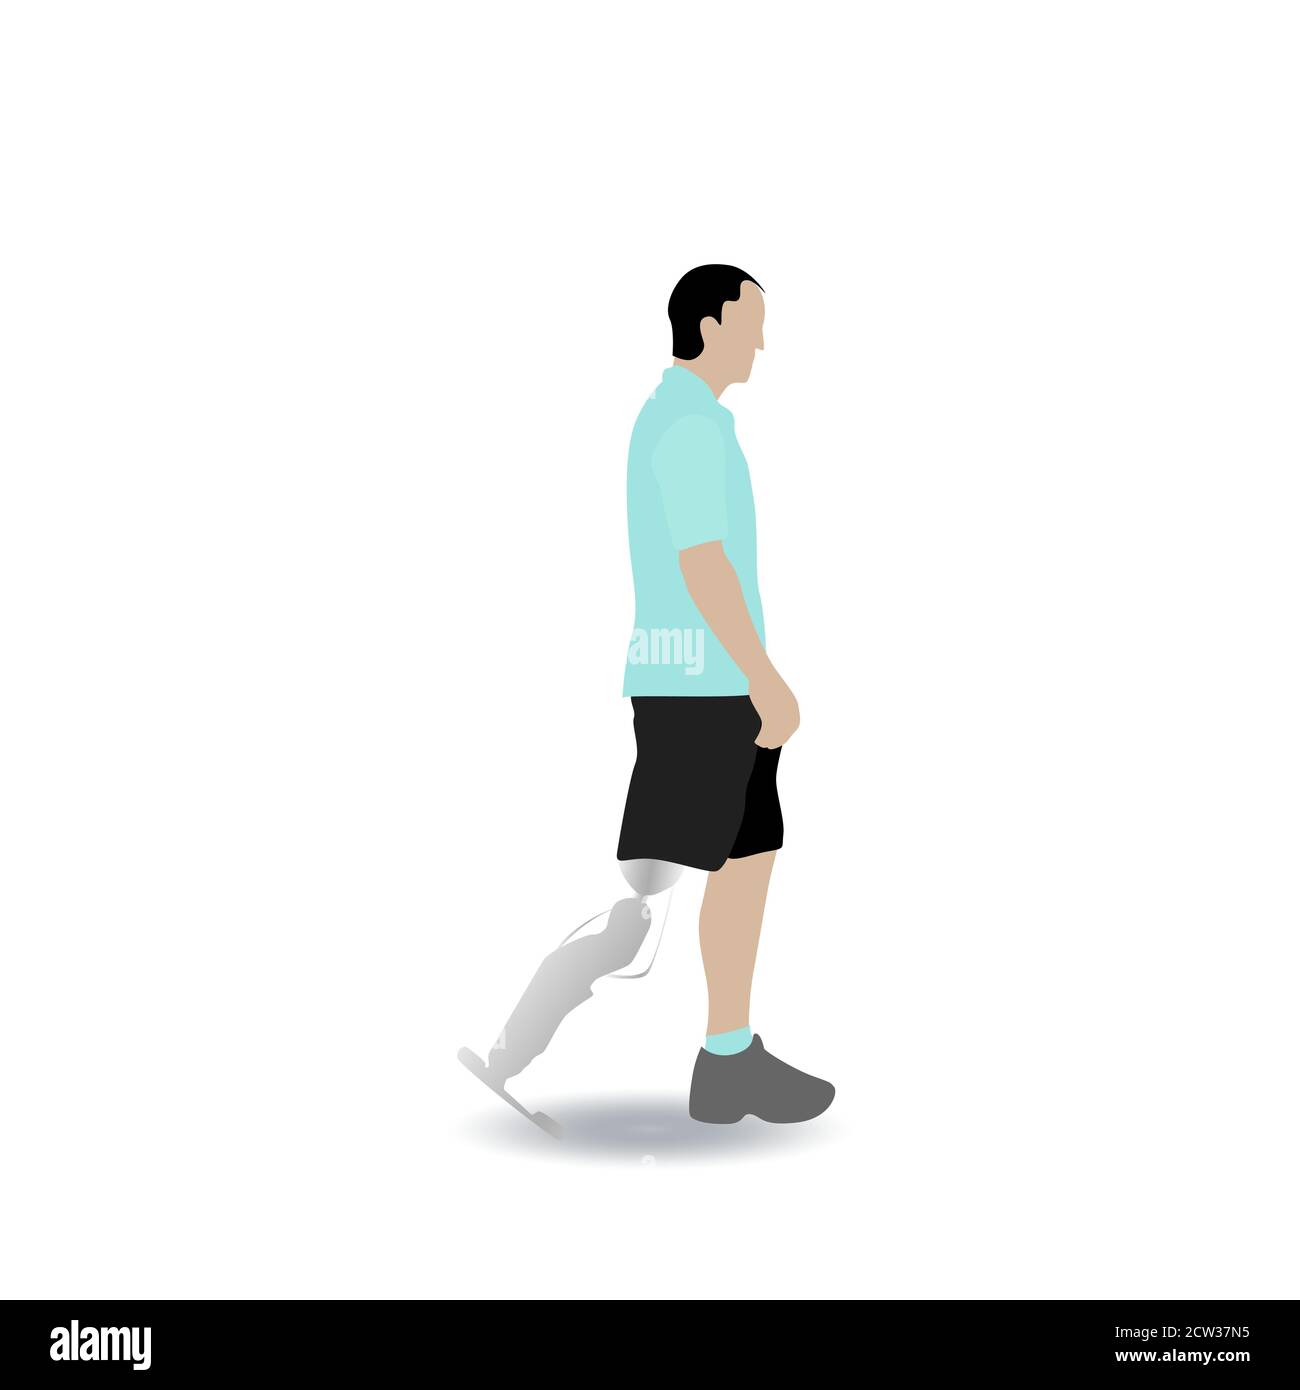 Man with leg prothesis walking isolated on white background. Prosthesis leg, walking disabled, person prosthetic artificial foot. Vector full-fledged Stock Vector